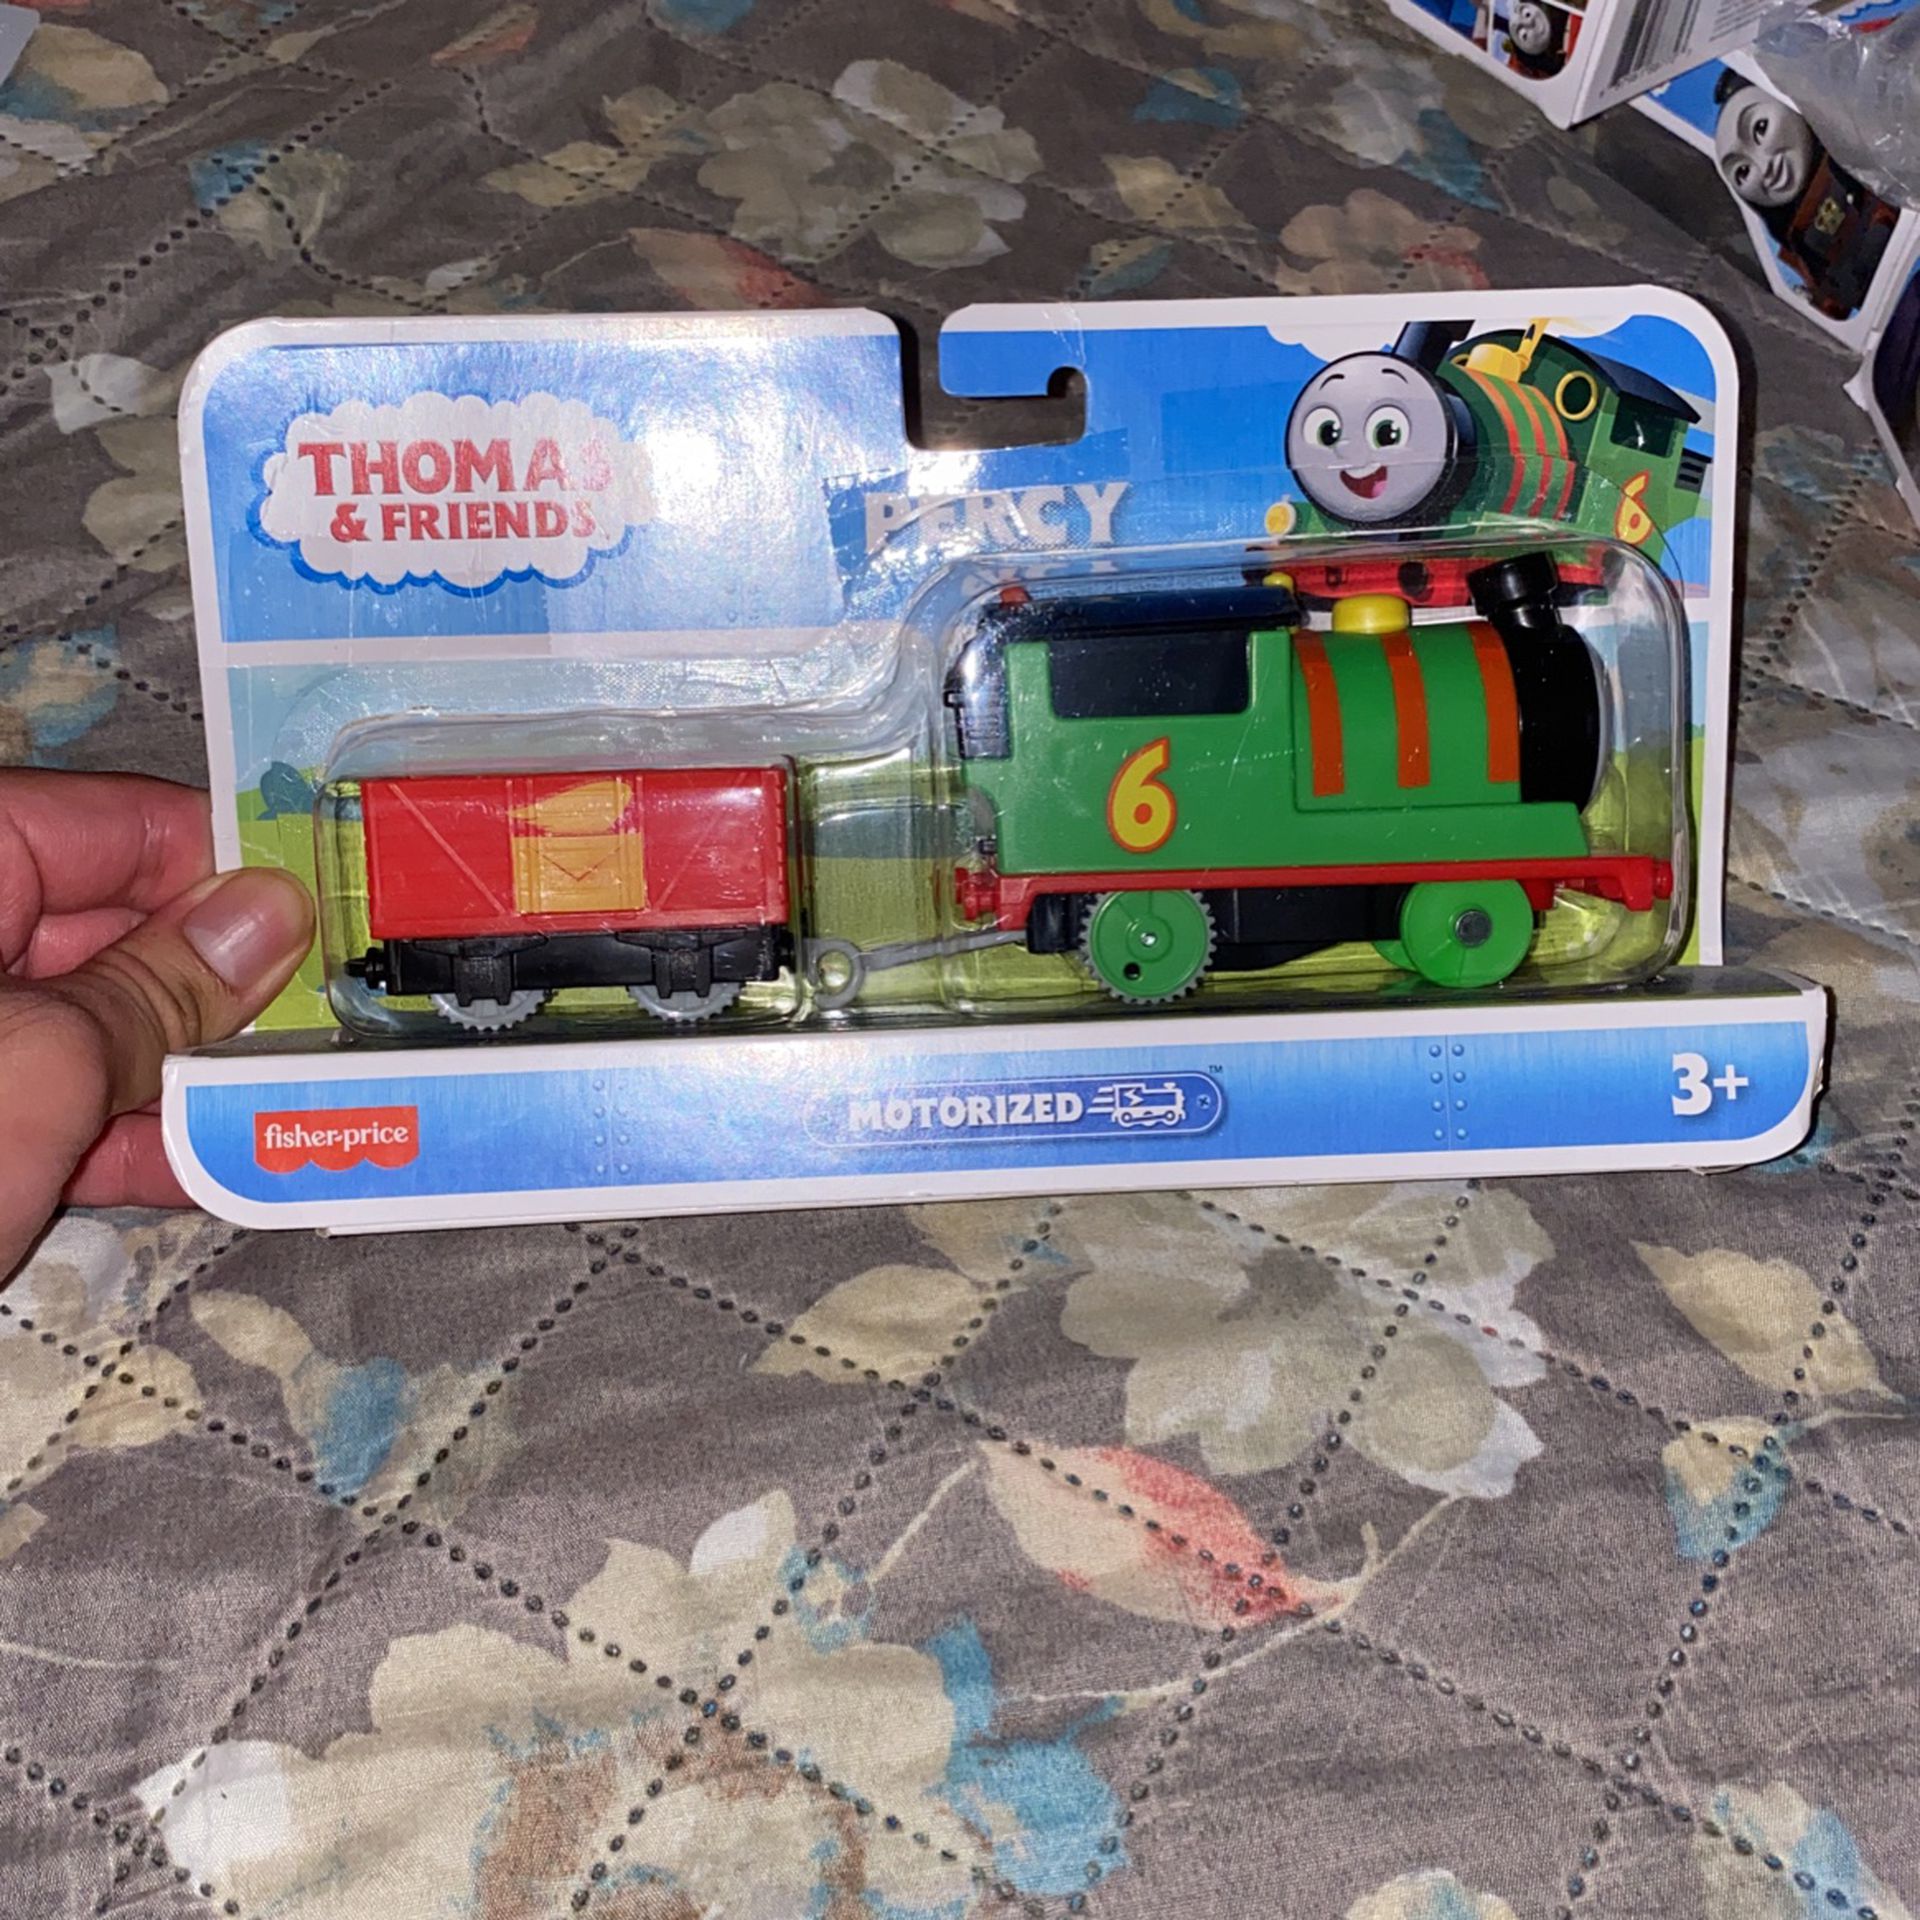 Thomas and friends toy train